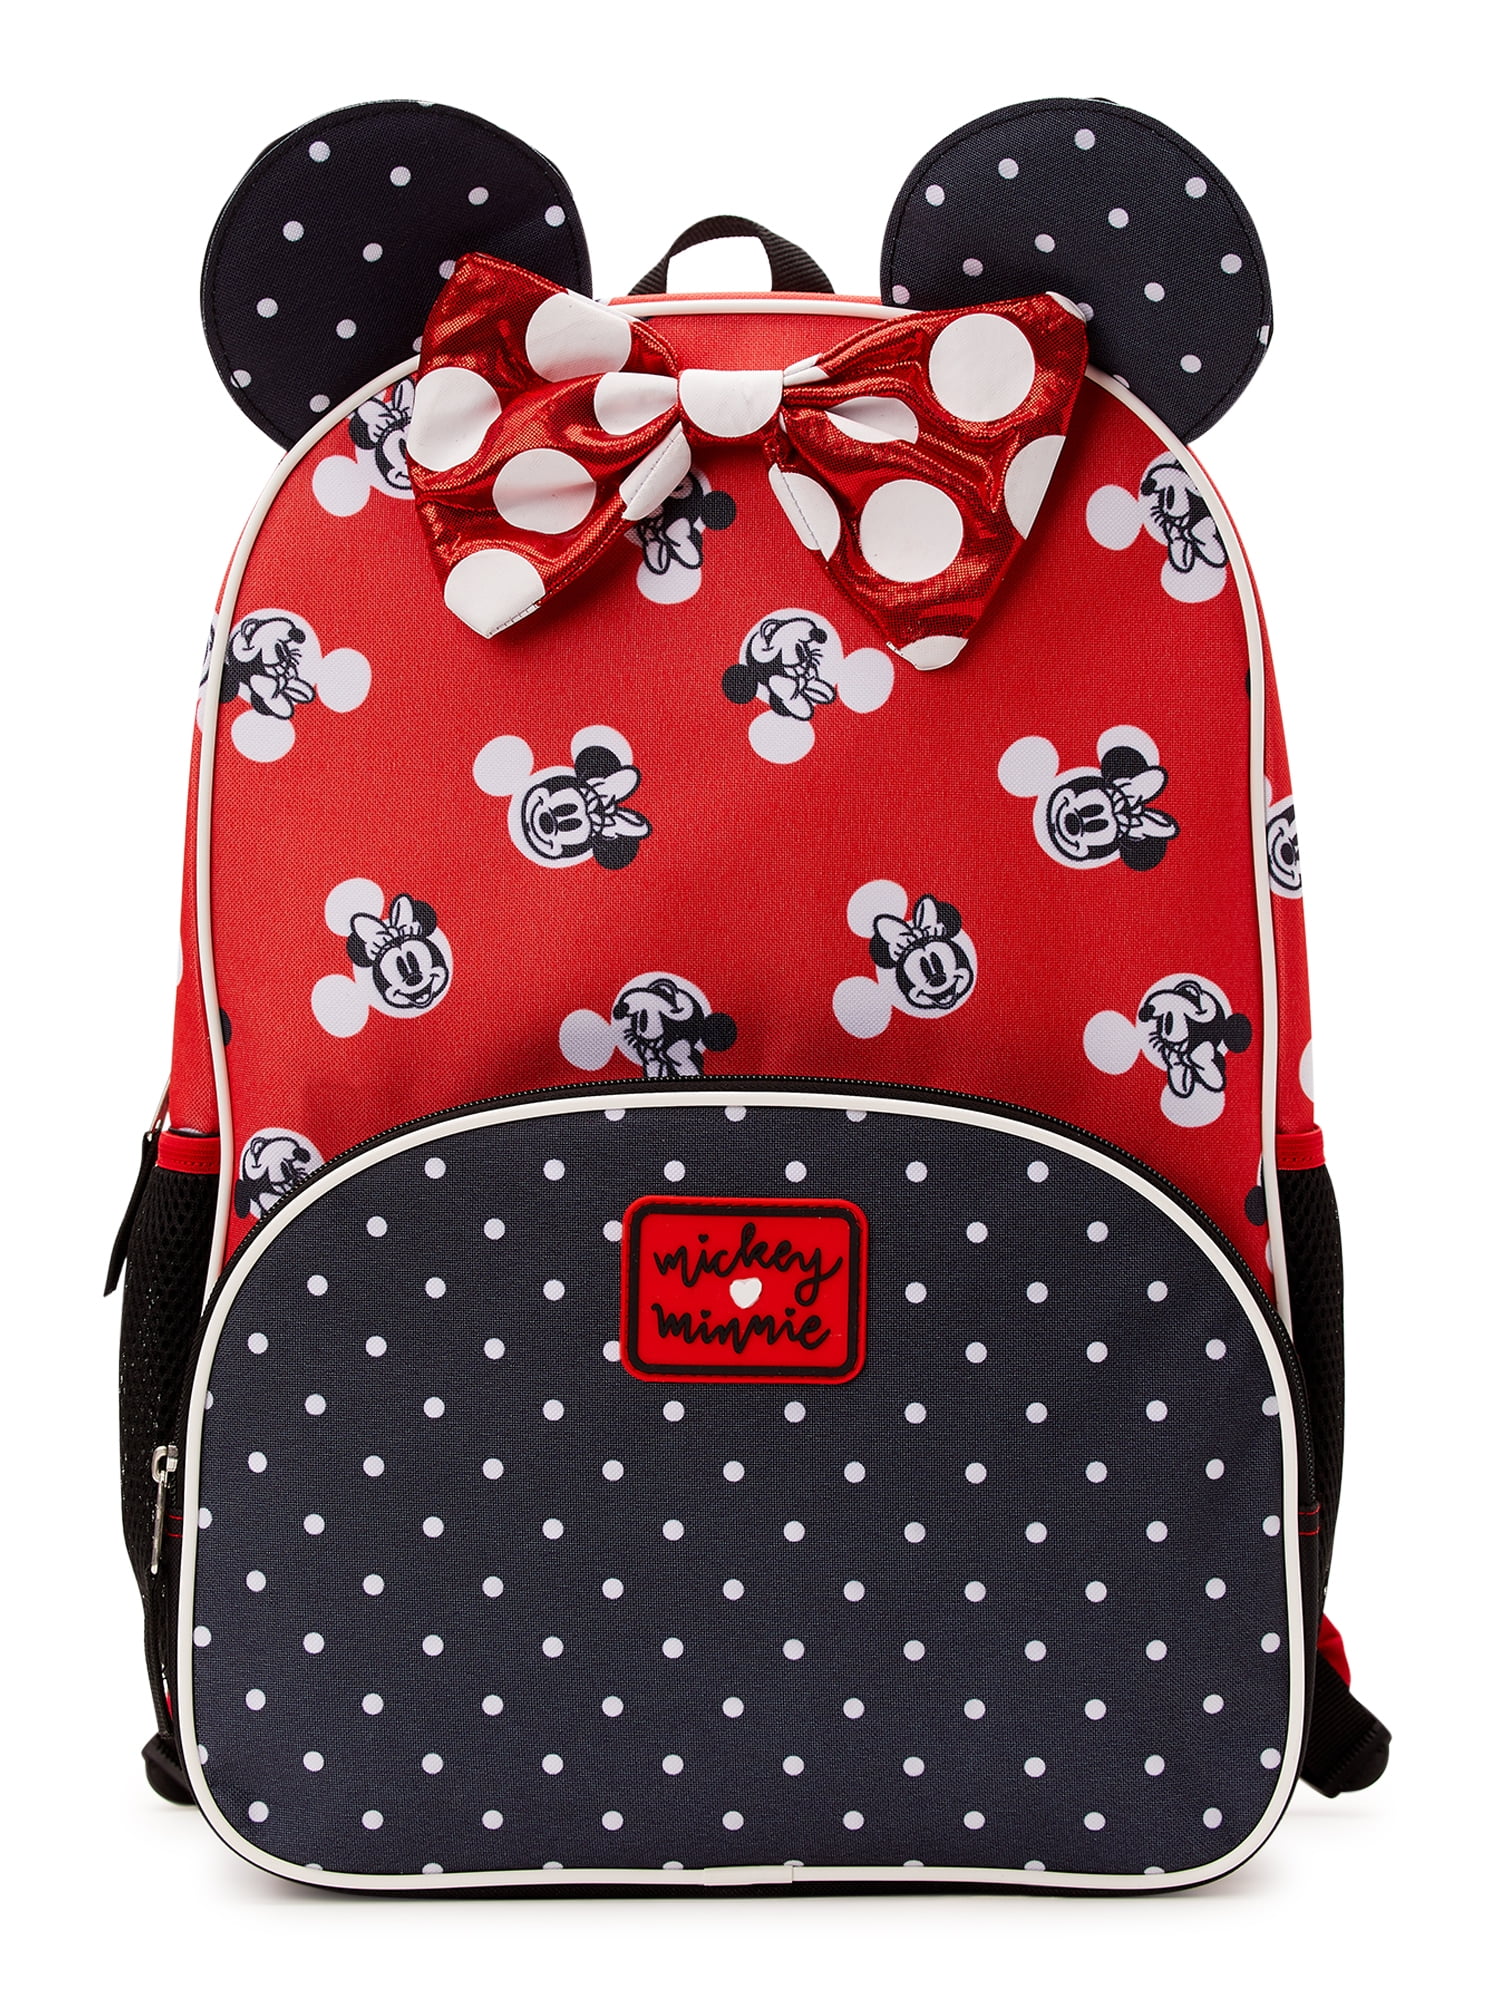 3Pcs/Set Disney Mickey Minnie Mouse Backpack Colorful Bag Boys